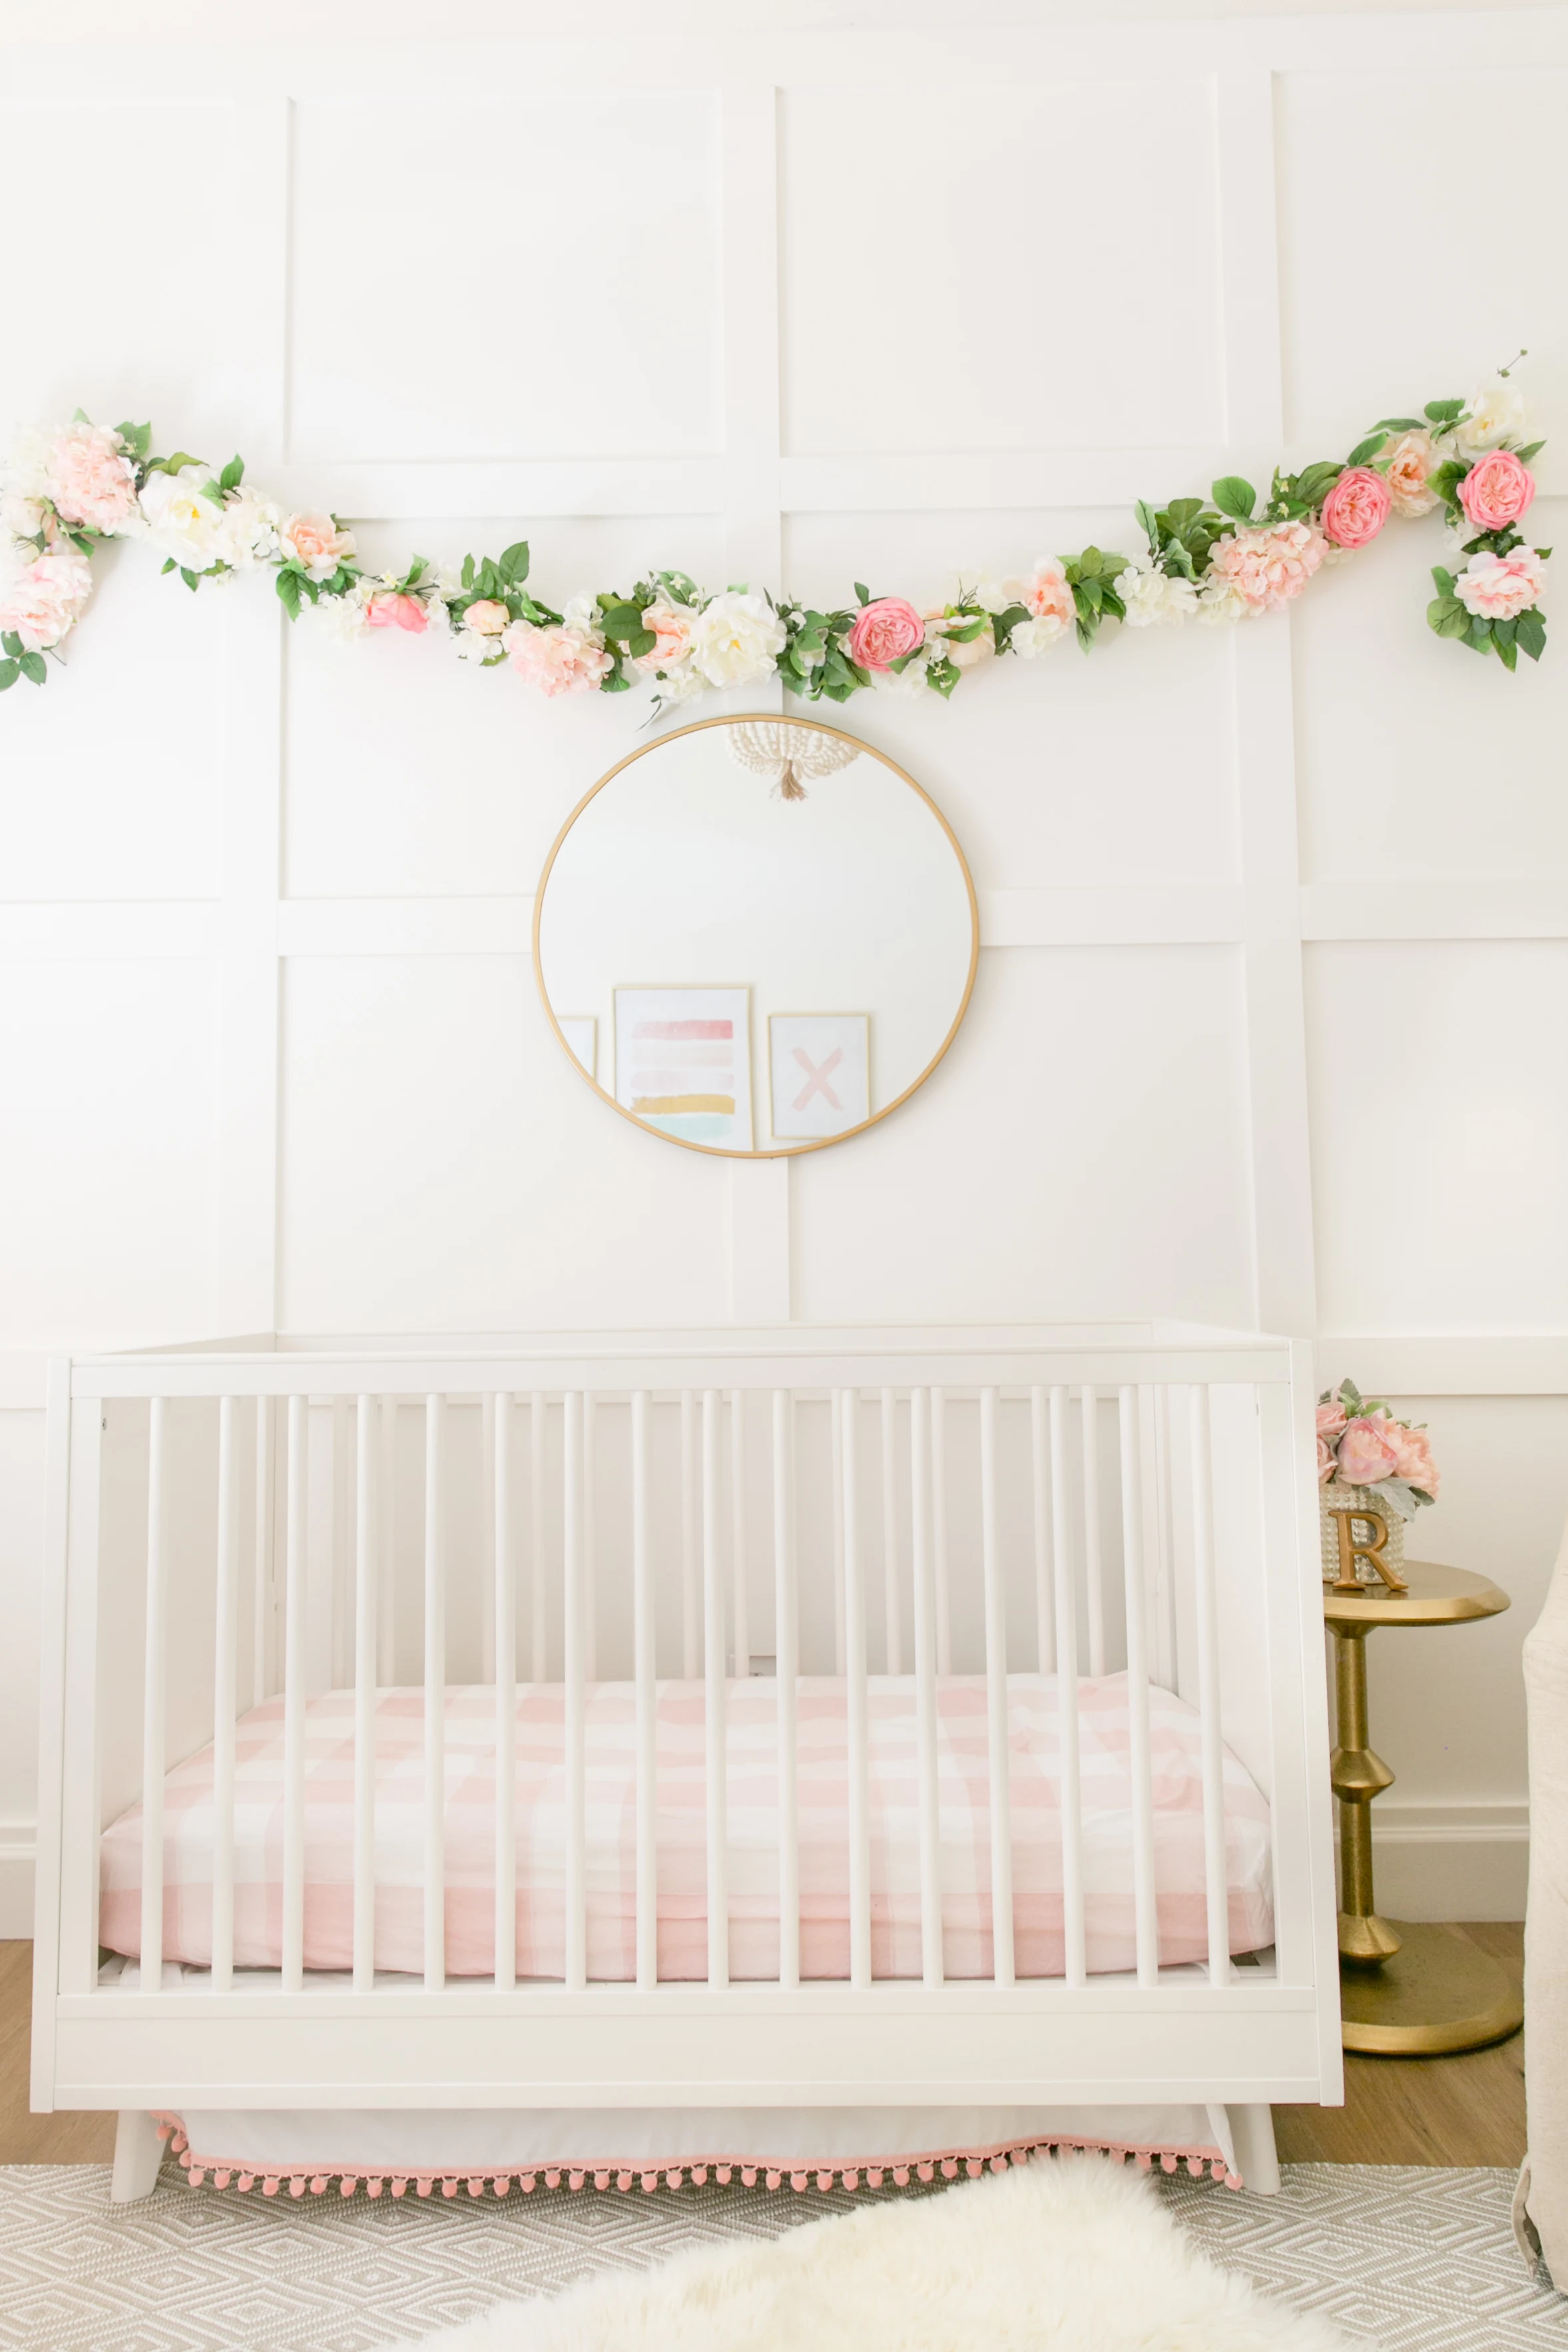 Square Molding Accent Wall with Floral Garland in Nursery